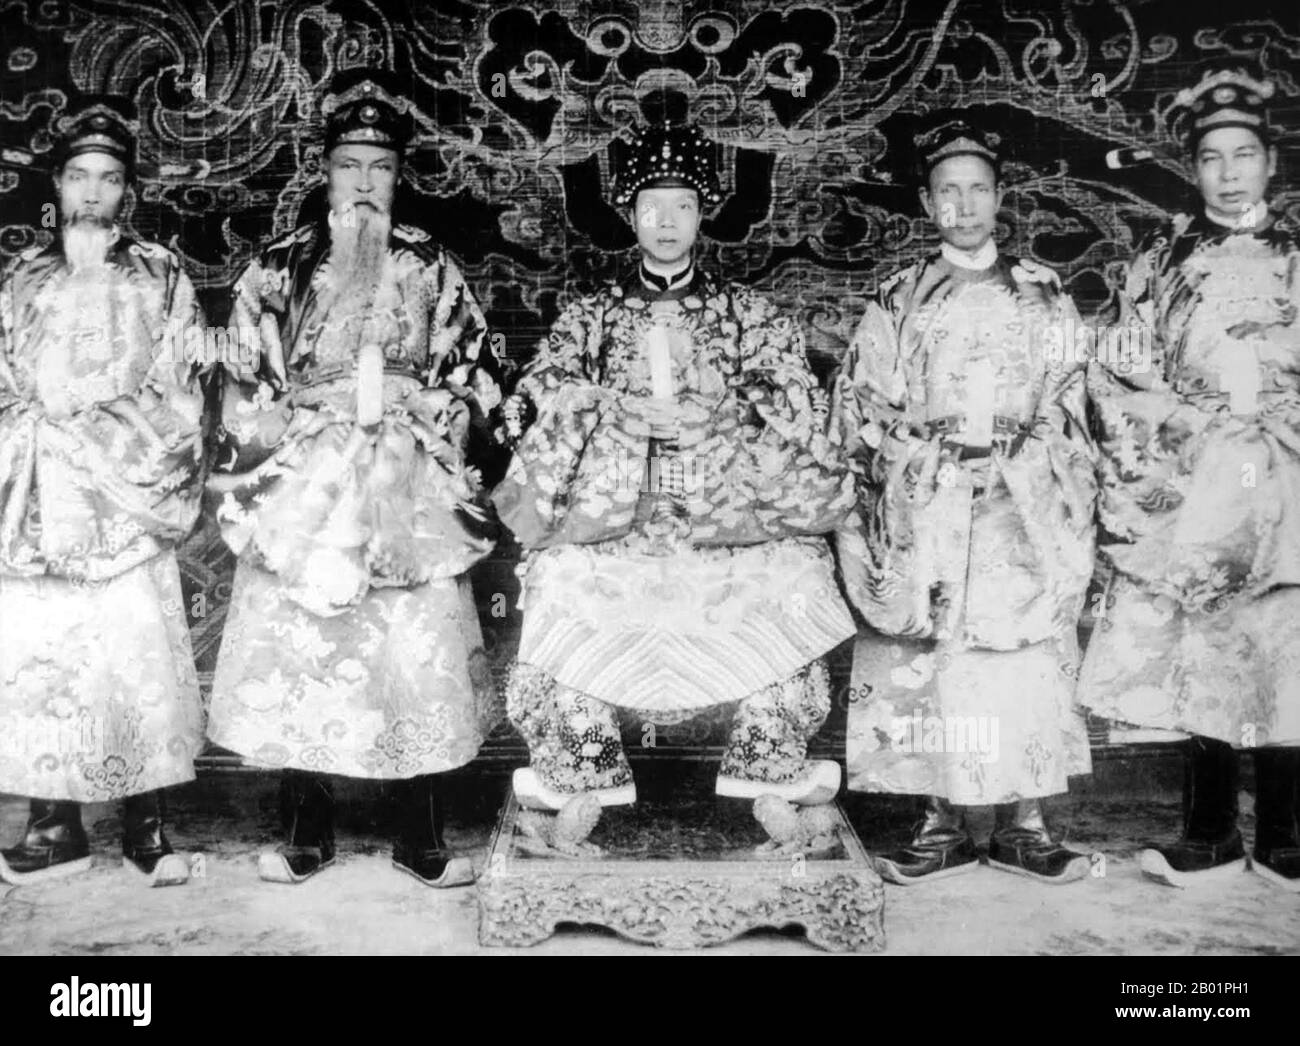 Vietnam: Emperor Khai Dinh (8 October 1885 - 6 November 1925), 12th emperor of the Nguyen Dynasty, with four court mandarins, 1919.  Emperor Khải Định was the 12th Emperor of the Nguyễn Dynasty in Vietnam. His name at birth was Prince Nguyễn Phúc Bửu Đảo. He was the son of Emperor Đồng Khánh, but he did not succeed him immediately. He reigned only nine years: 1916-1925. Stock Photo